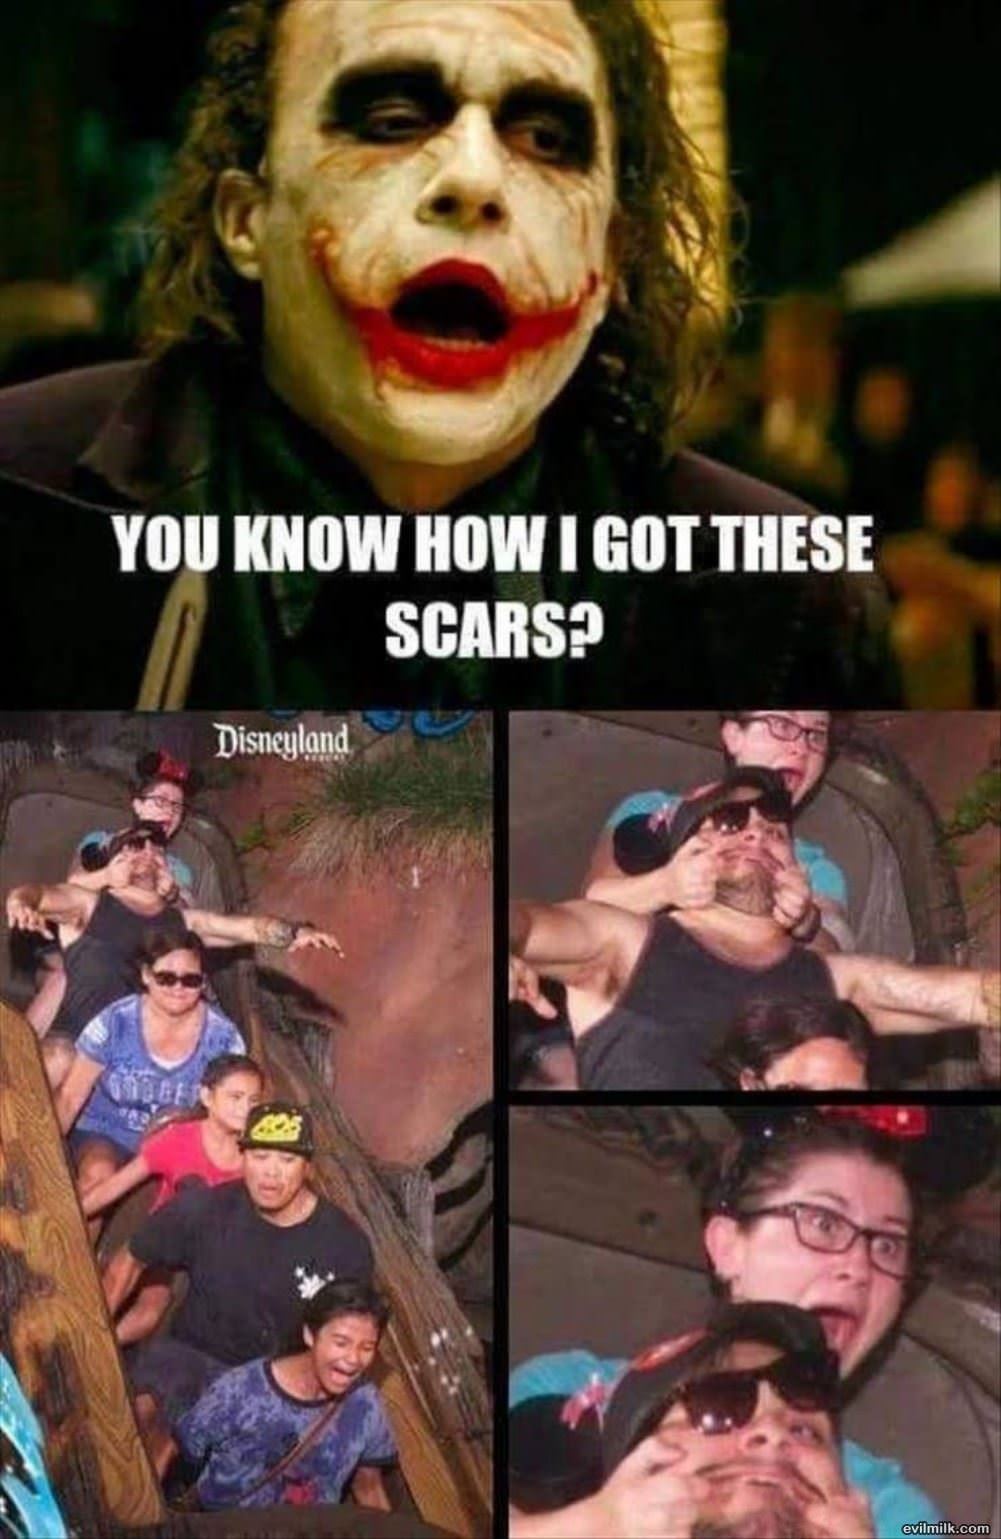 How I Got These Scars